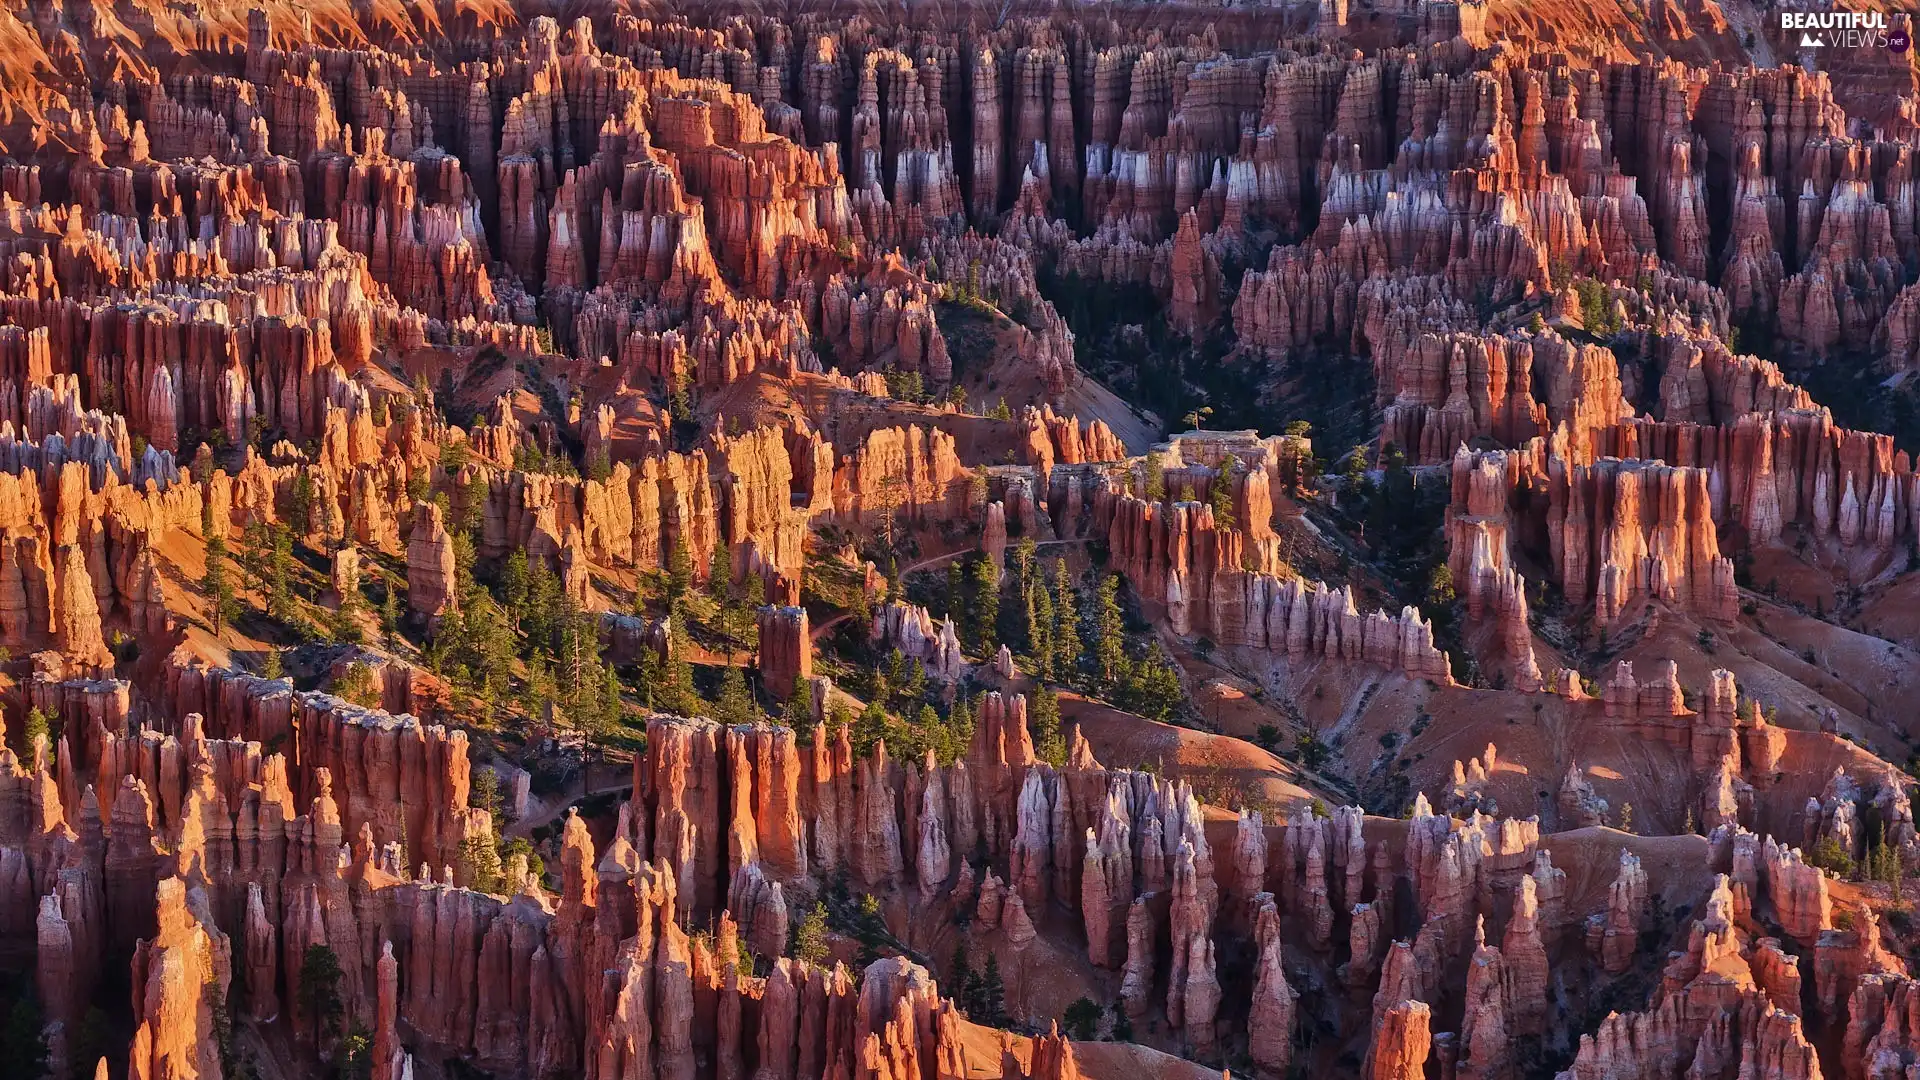 Utah State, The United States, canyon, Bryce Canyon National Park, rocks